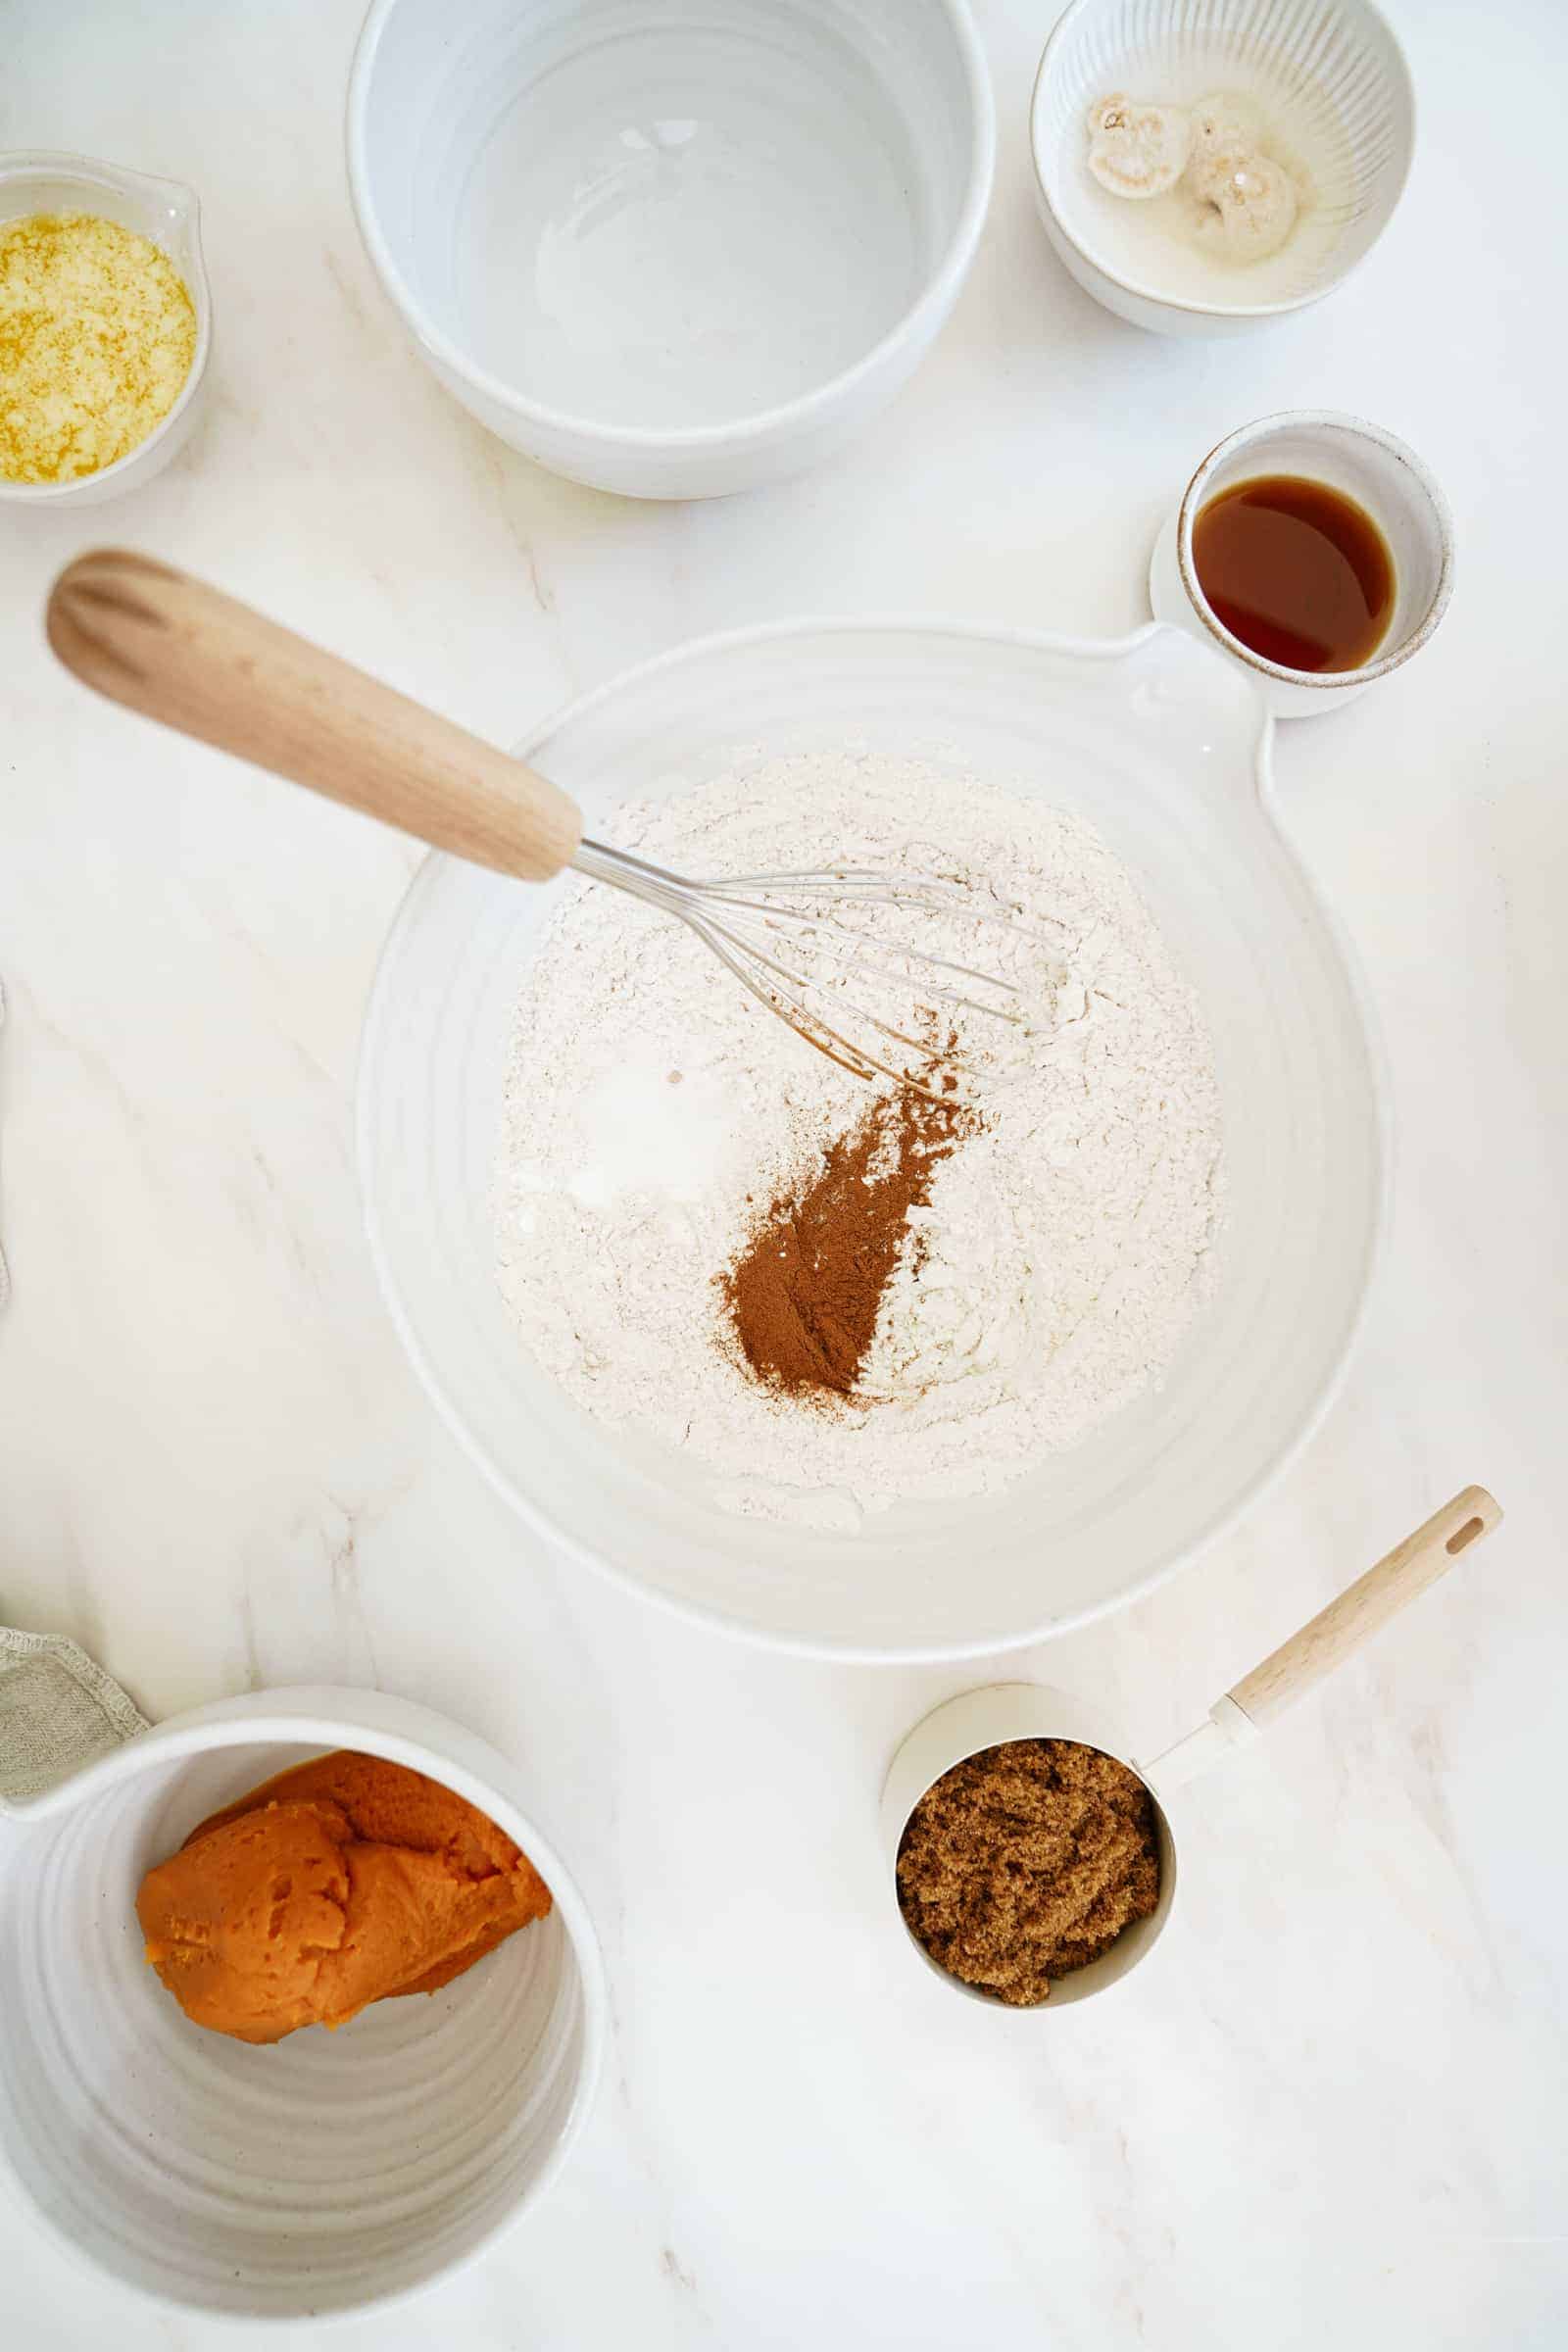 Dry ingredients in a mixing bowl